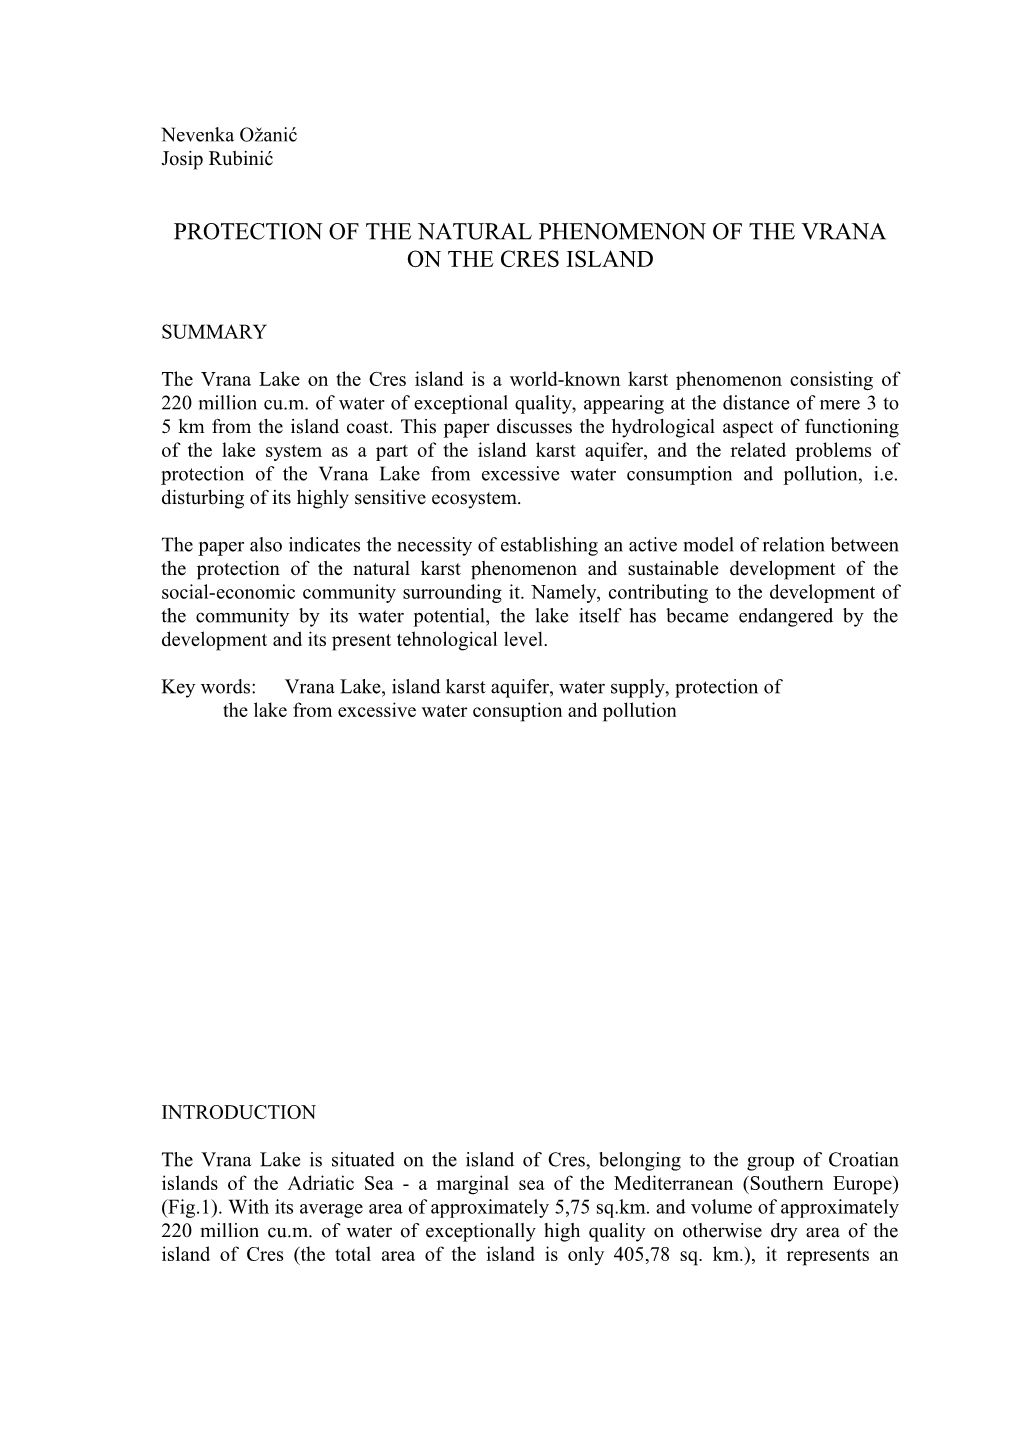 Protection of the Natural Phenomenon of the Vrana on the Cres Island